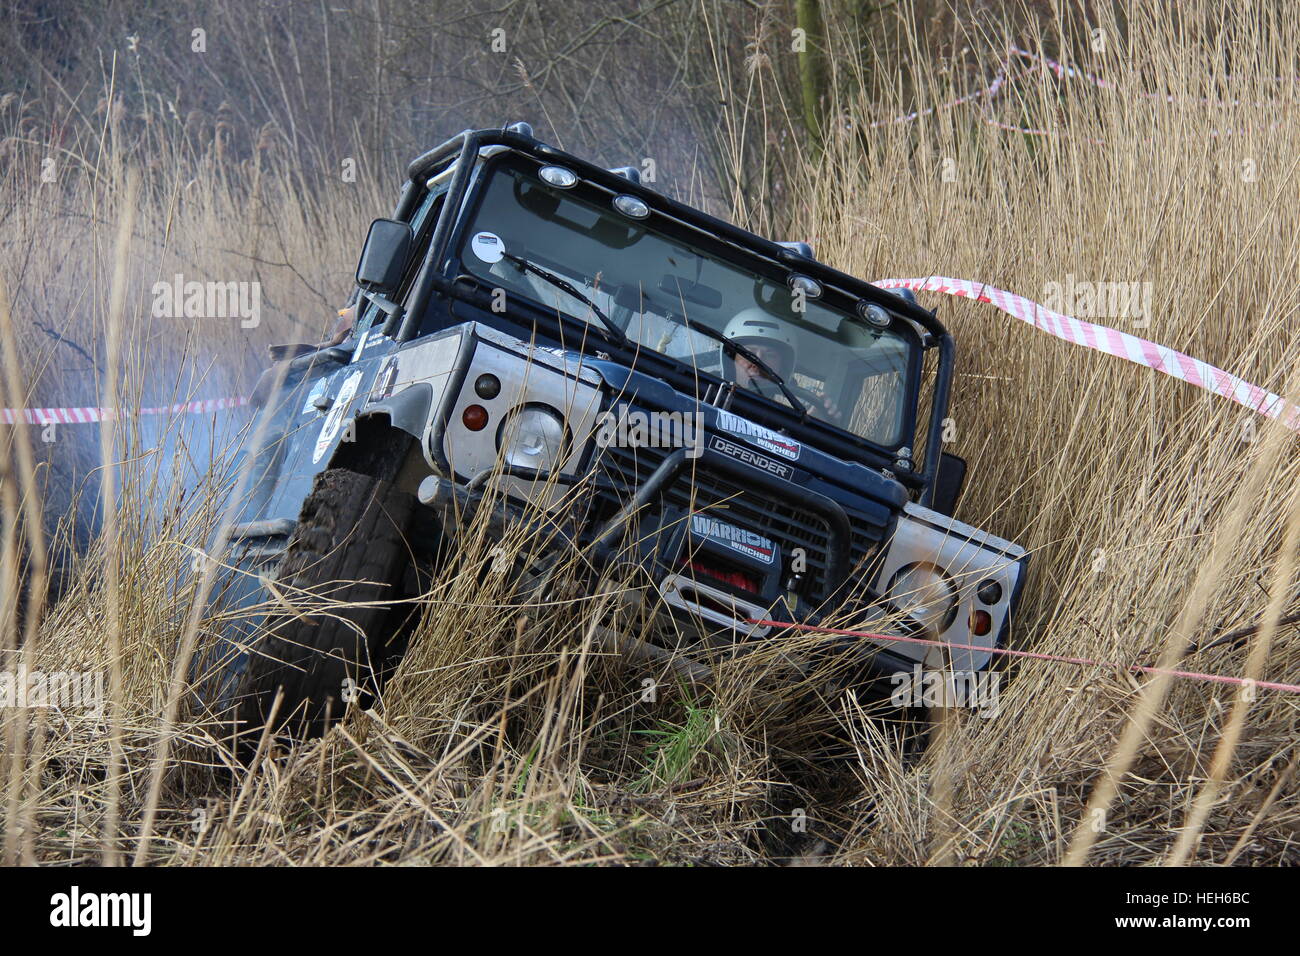 Land Rover Defender 90 winching dalla palude melmosa durante un 4x4 off road challenge in Spaarnwoude, Paesi Bassi Foto Stock